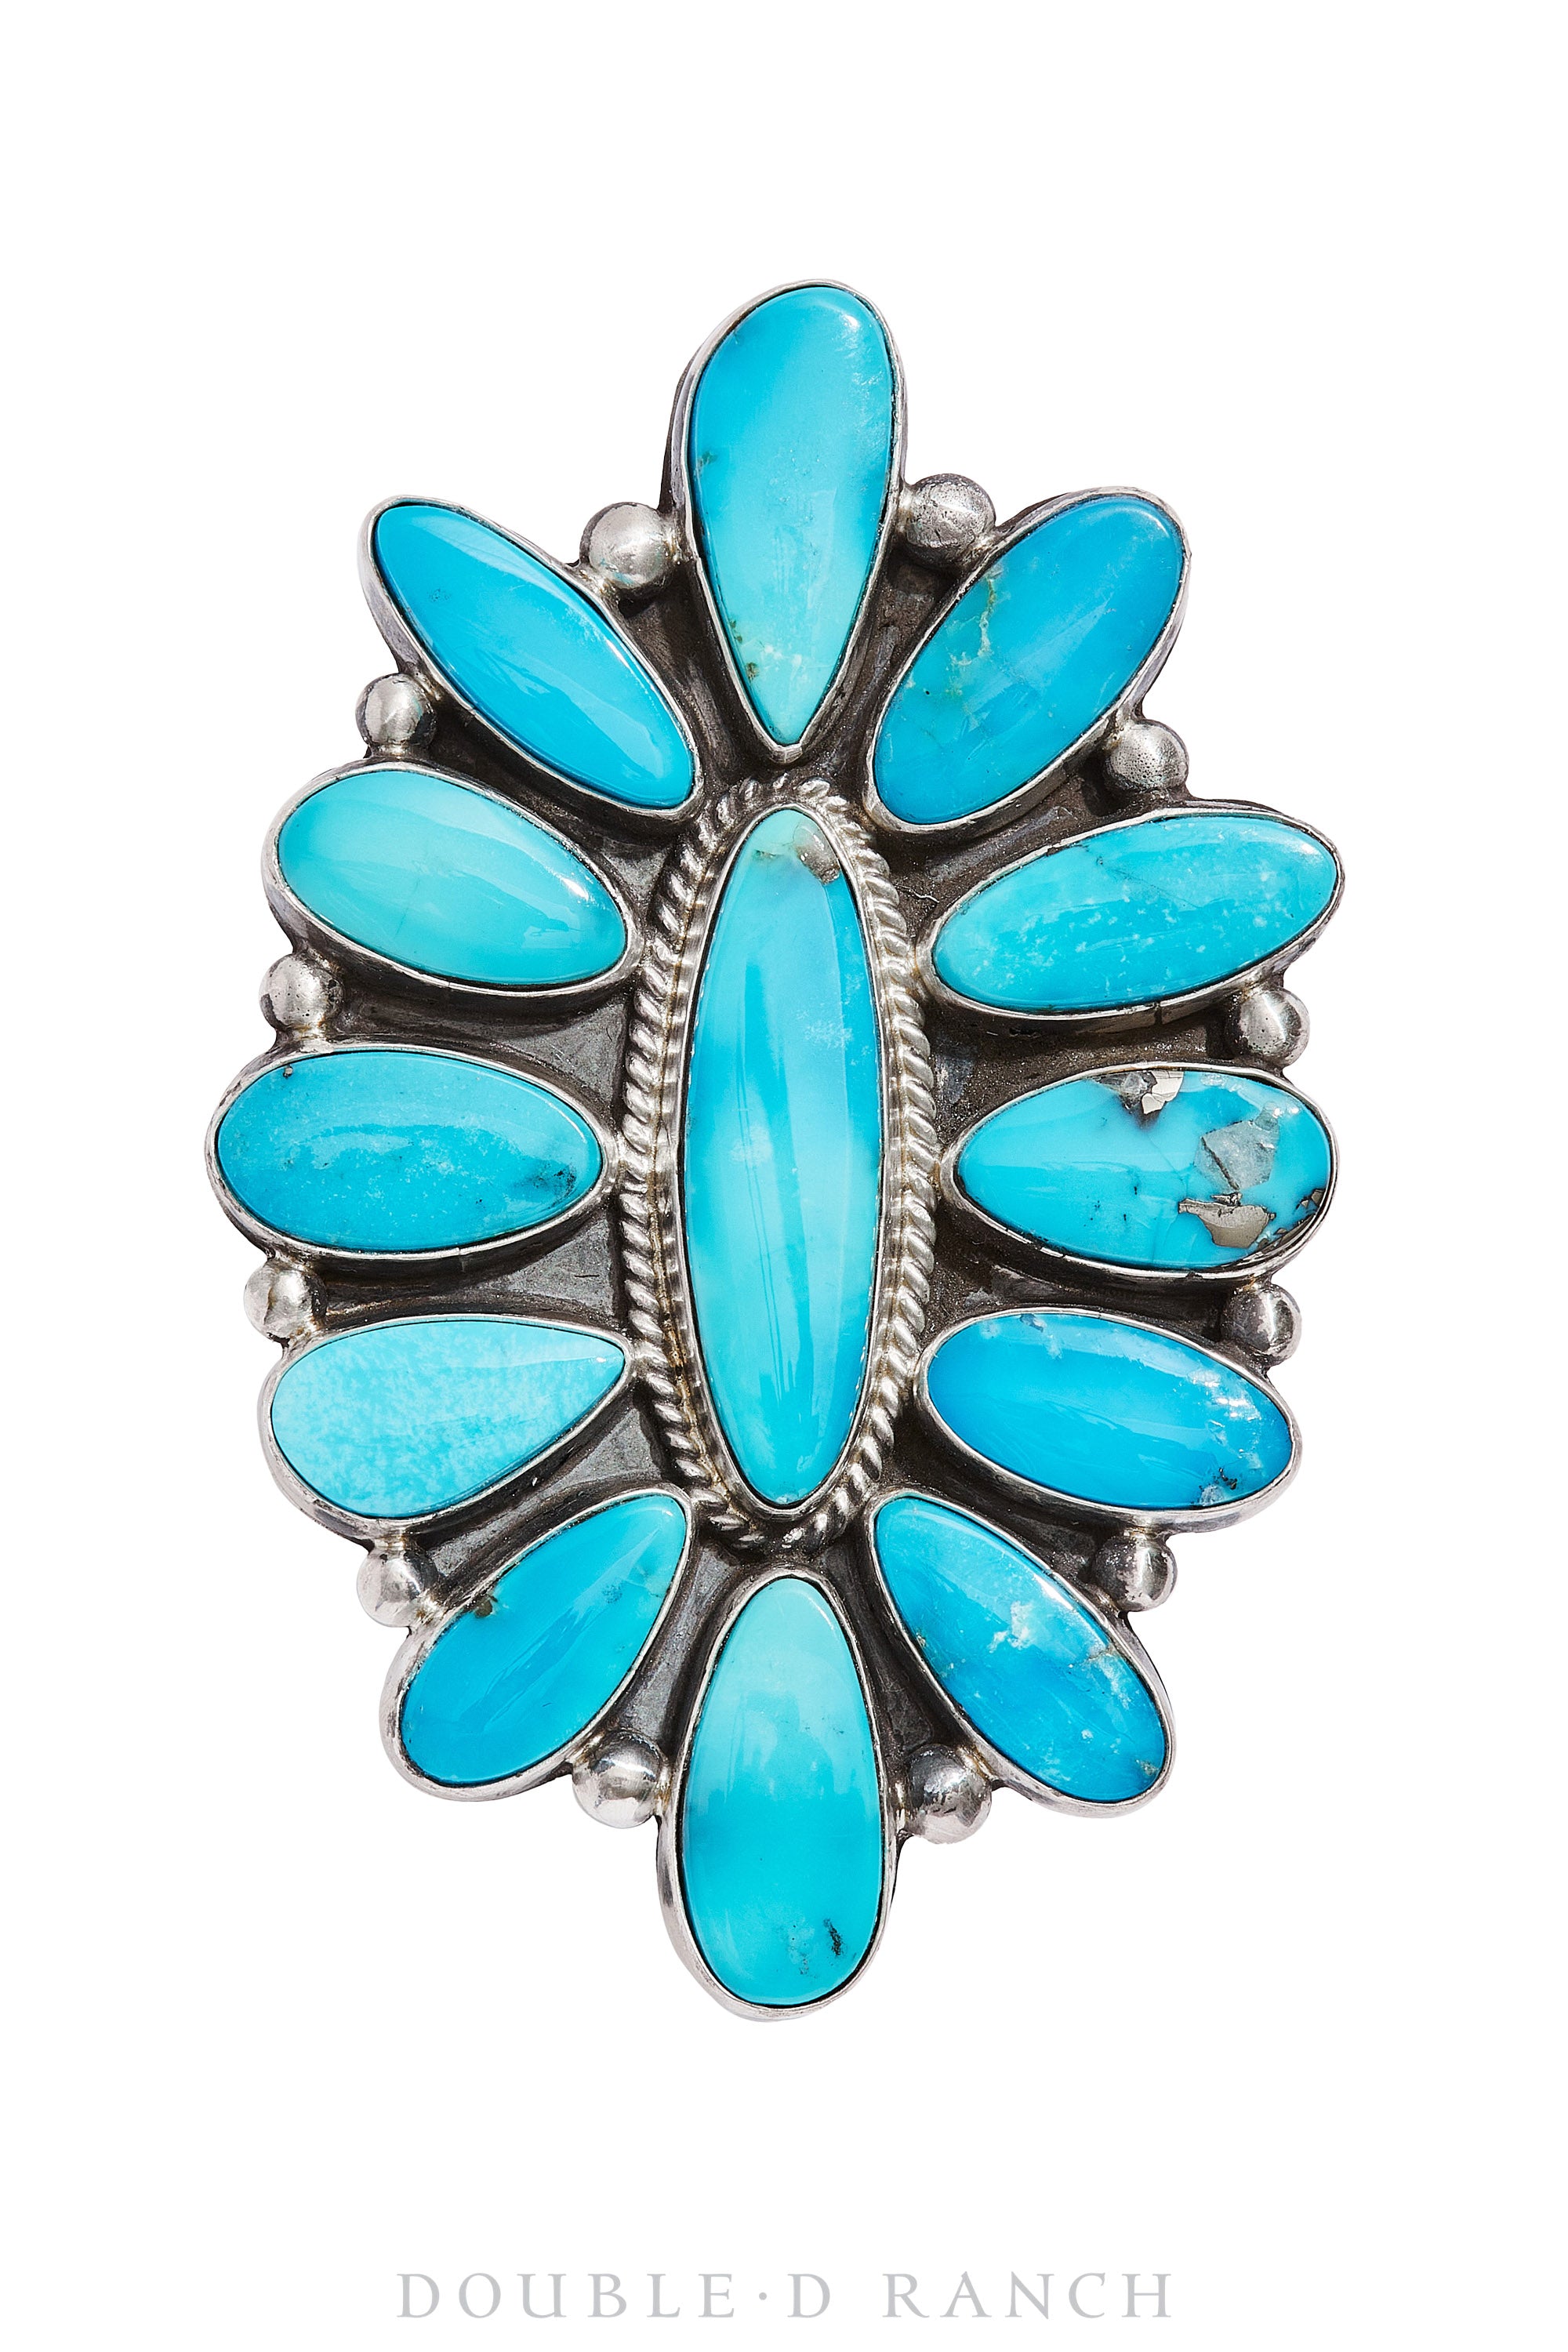 Ring, Cluster, Turquoise, Hallmark, Contemporary, 1070